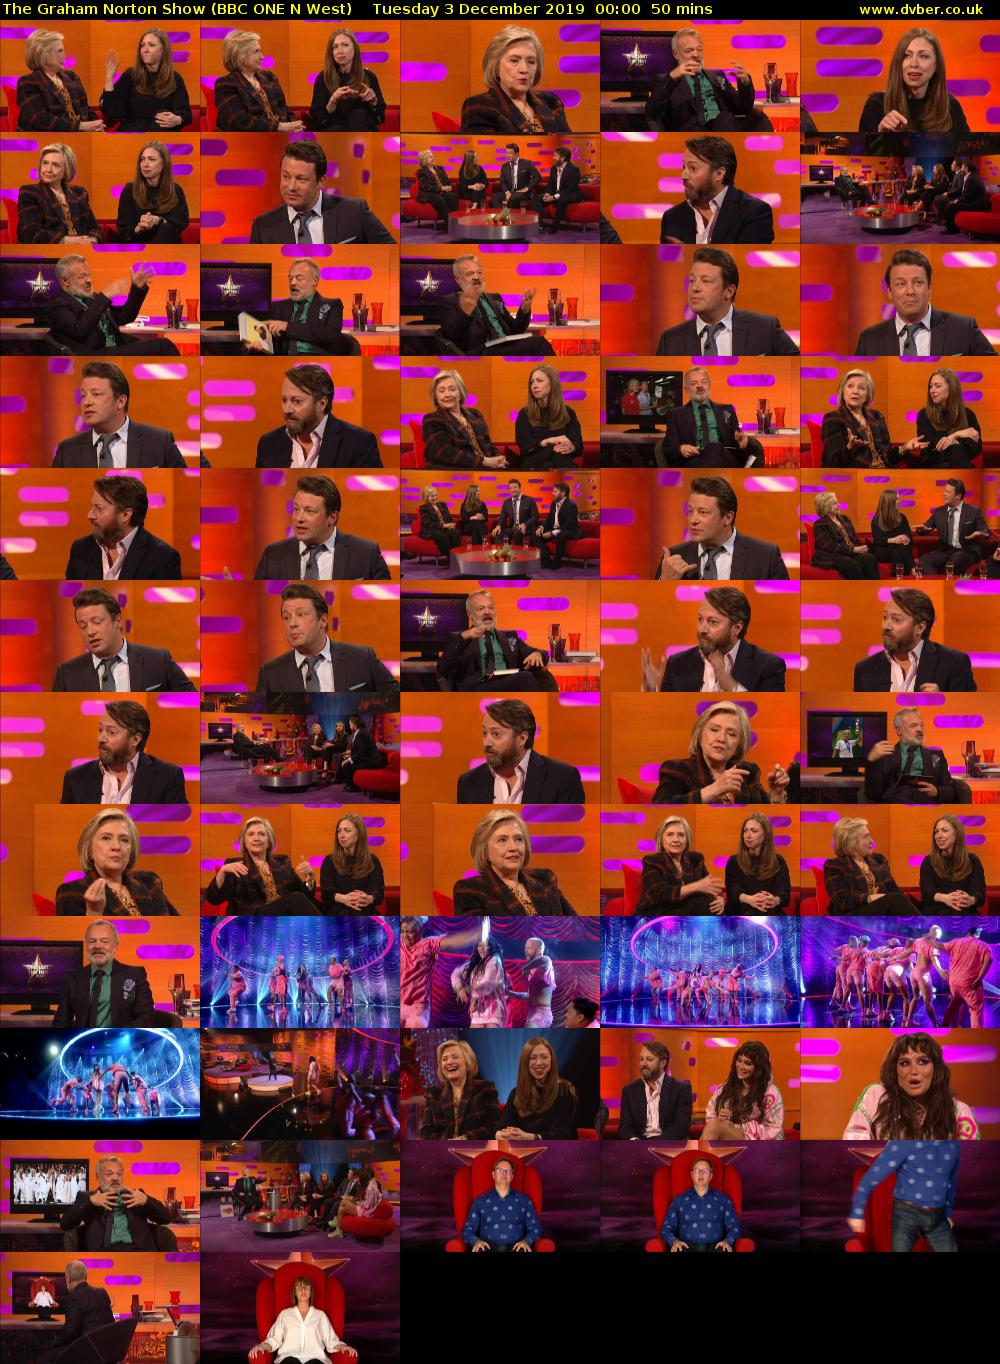 The Graham Norton Show (BBC ONE N West) Tuesday 3 December 2019 00:00 - 00:50